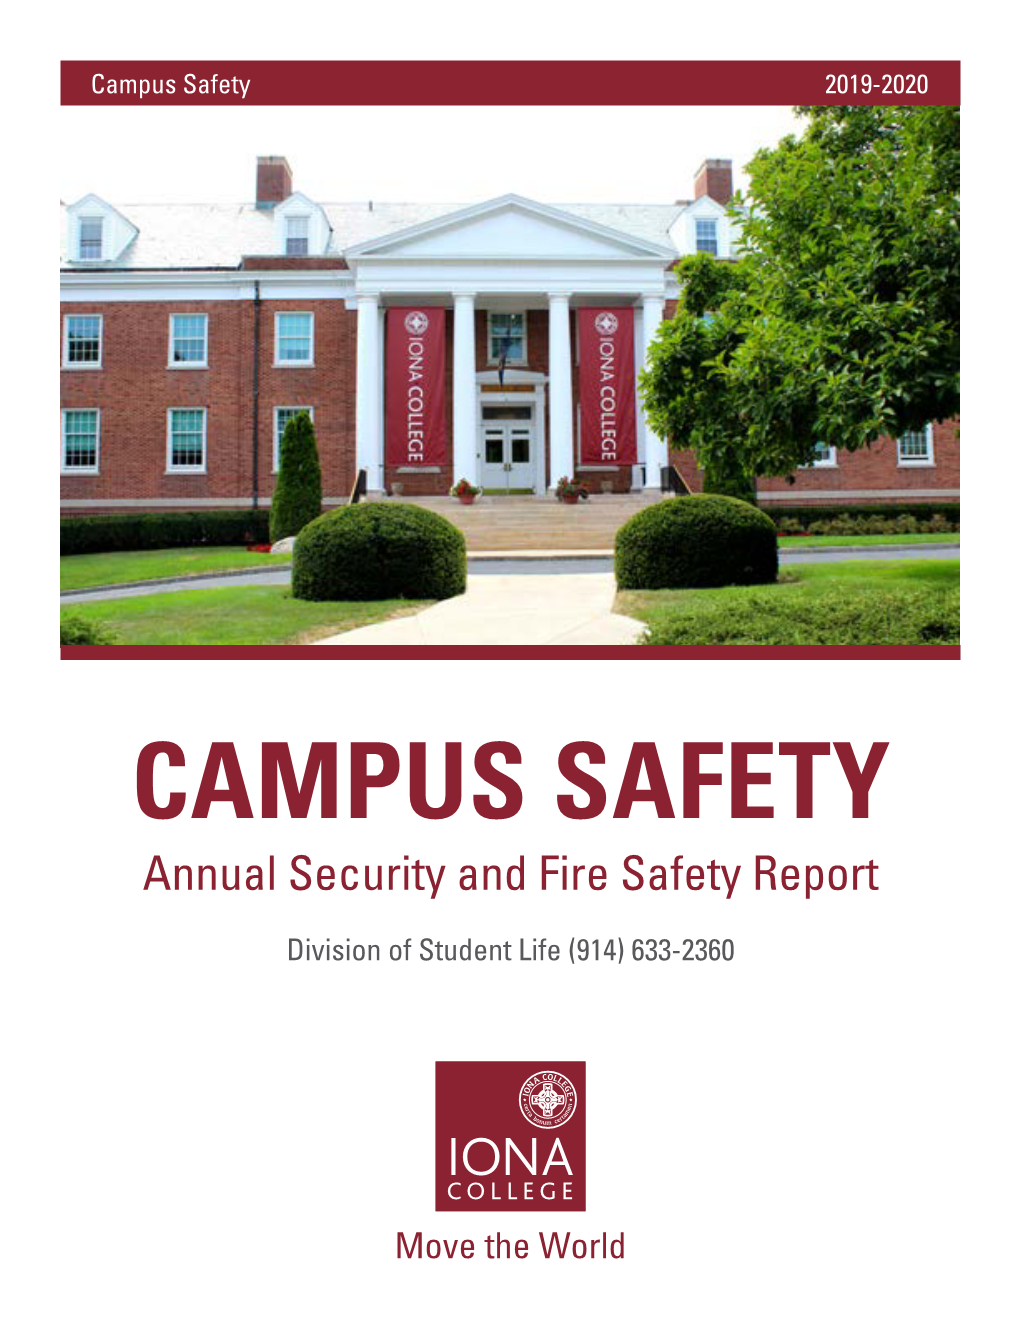 CAMPUS SAFETY Annual Security and Fire Safety Report